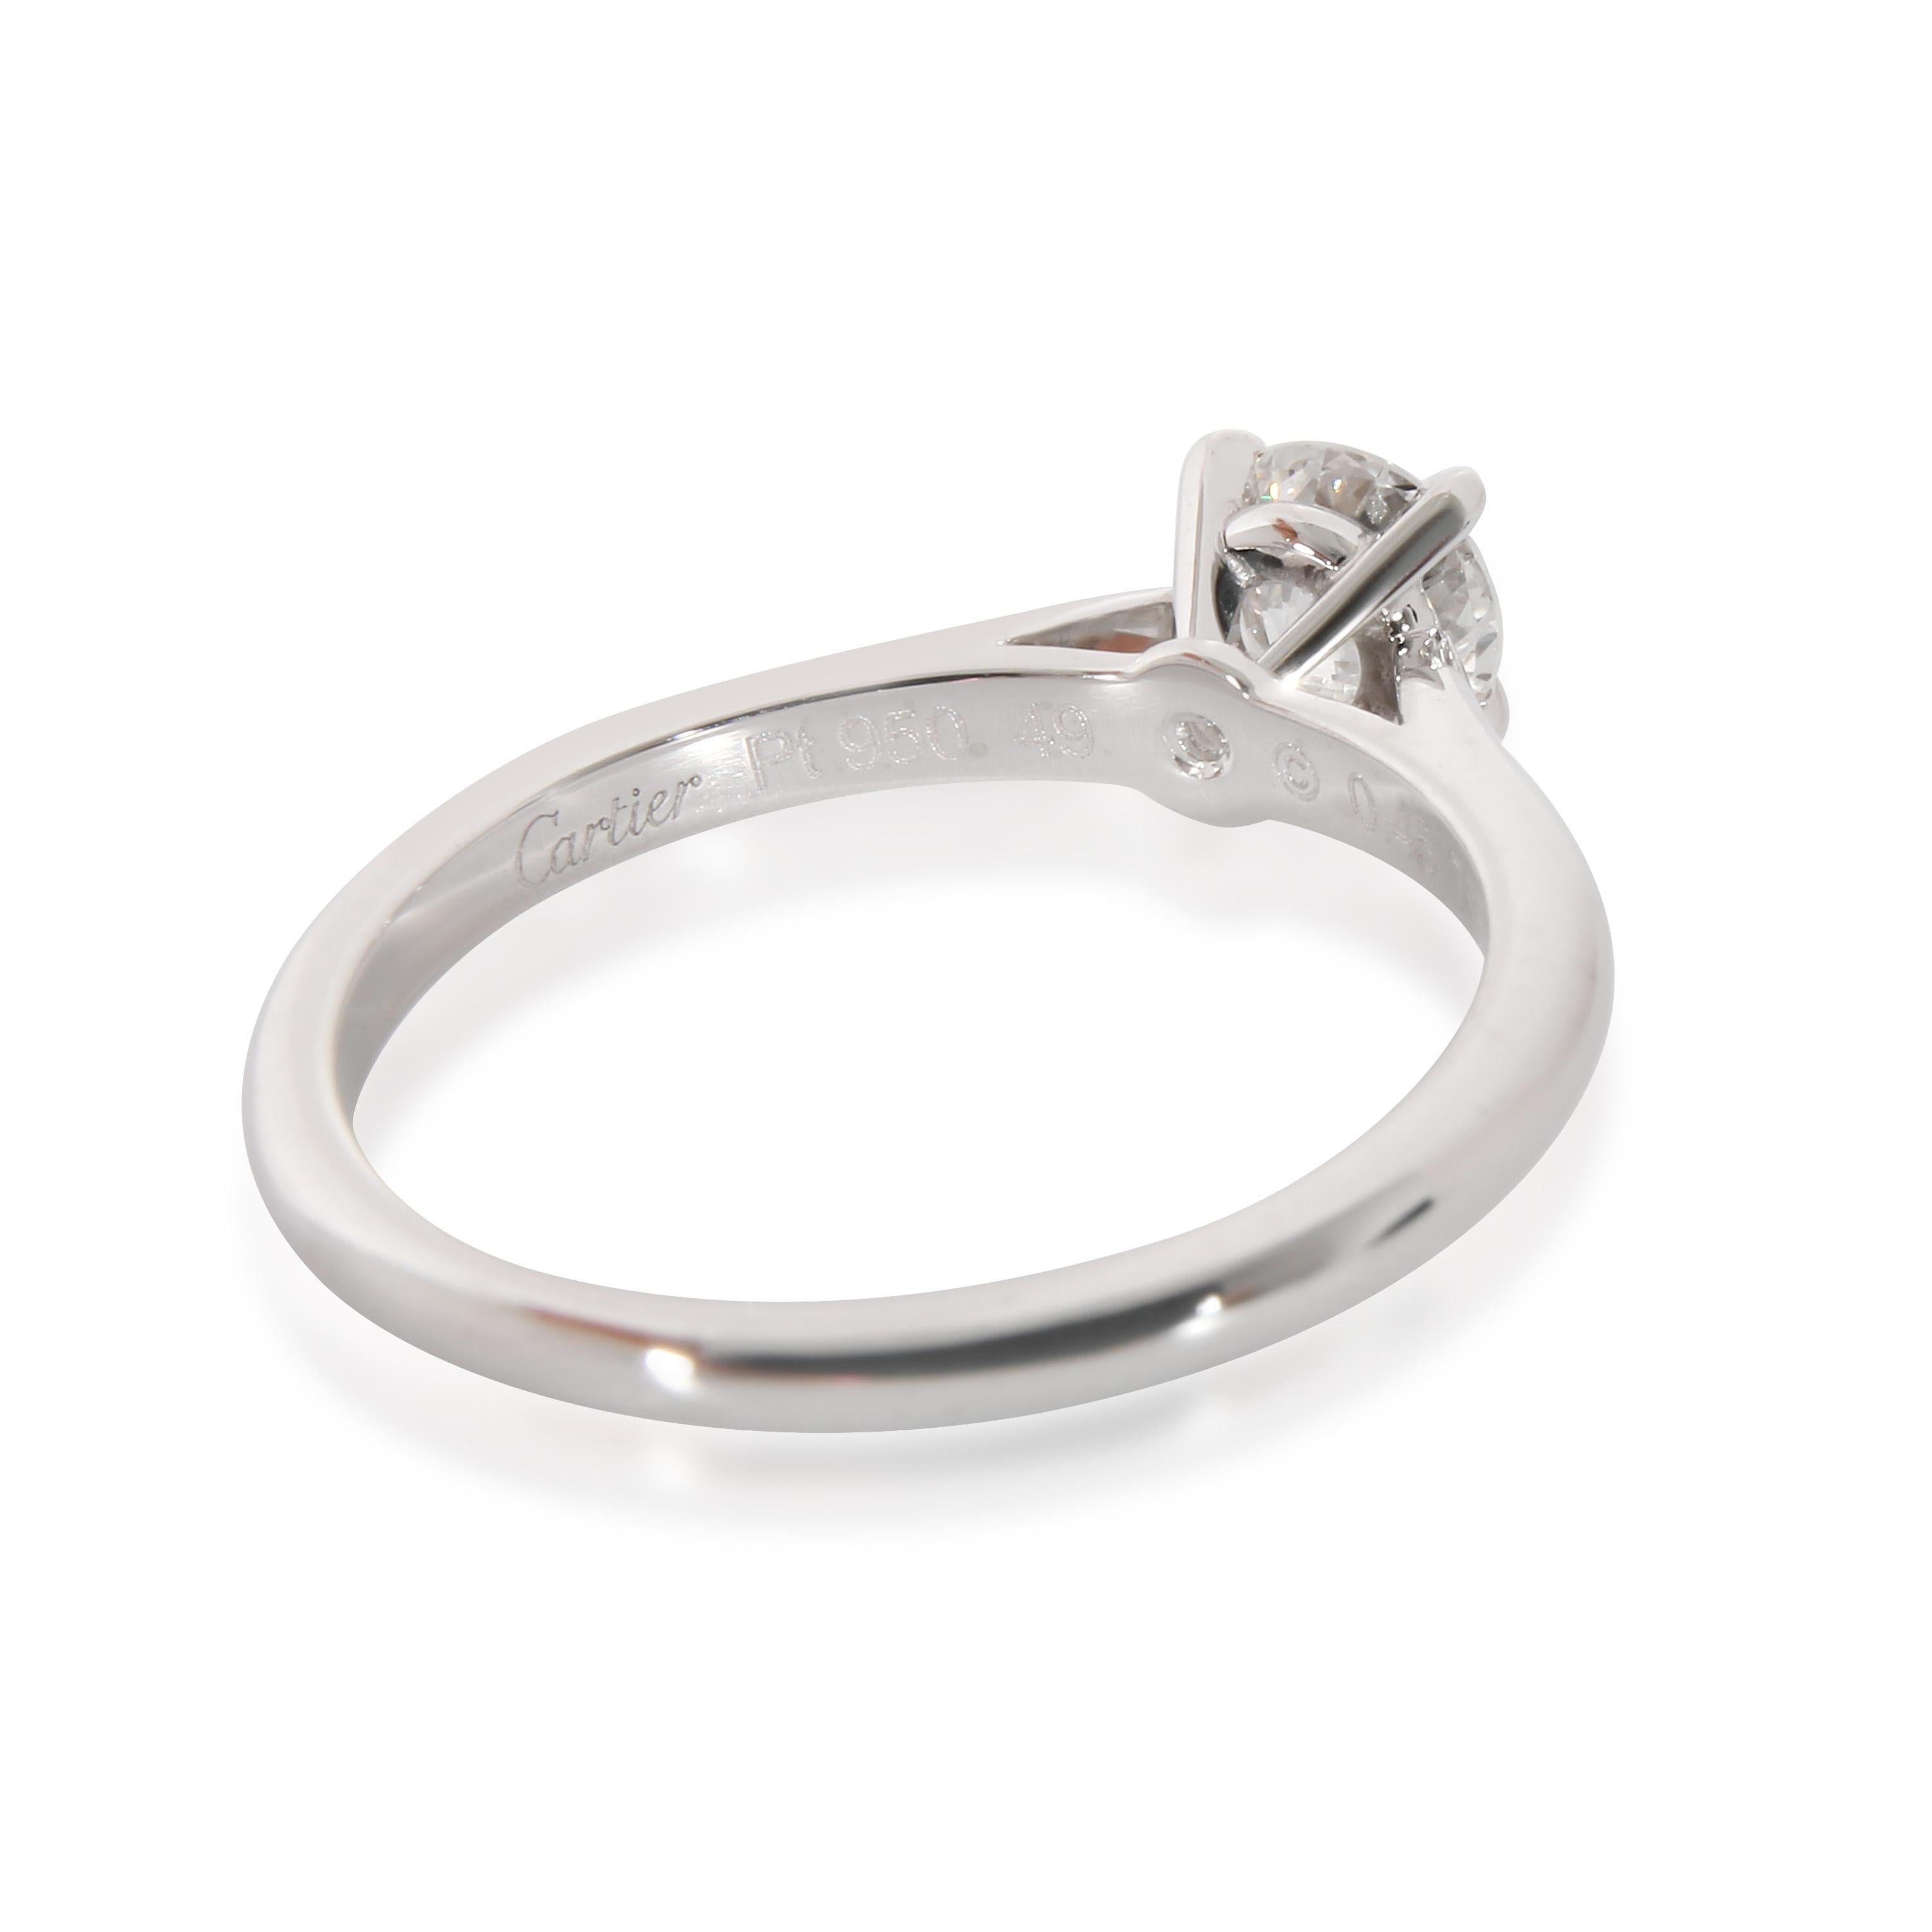 Cartier Solitaire 1895 Diamond Engagement Ring in Platinum E VS1 0.45 CTW

PRIMARY DETAILS
SKU: 133150
Listing Title: Cartier Solitaire 1895 Diamond Engagement Ring in Platinum E VS1 0.45 CTW
Condition Description: A collection that started with a